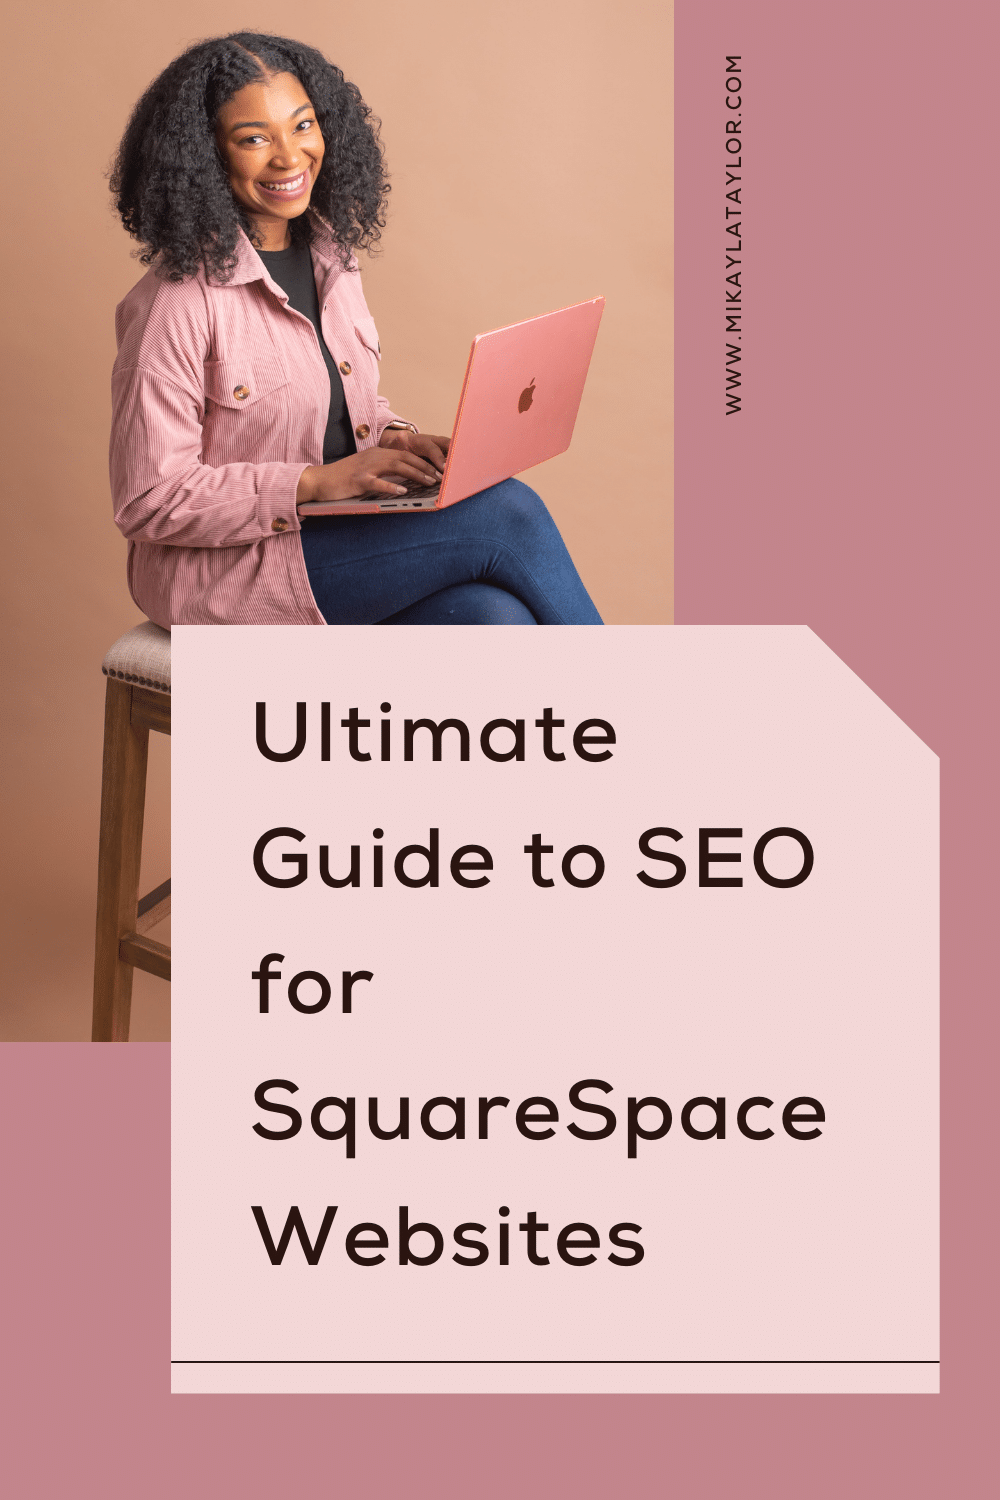 ultimate guide to squarespace website seo mikaylataylor.com pinterest